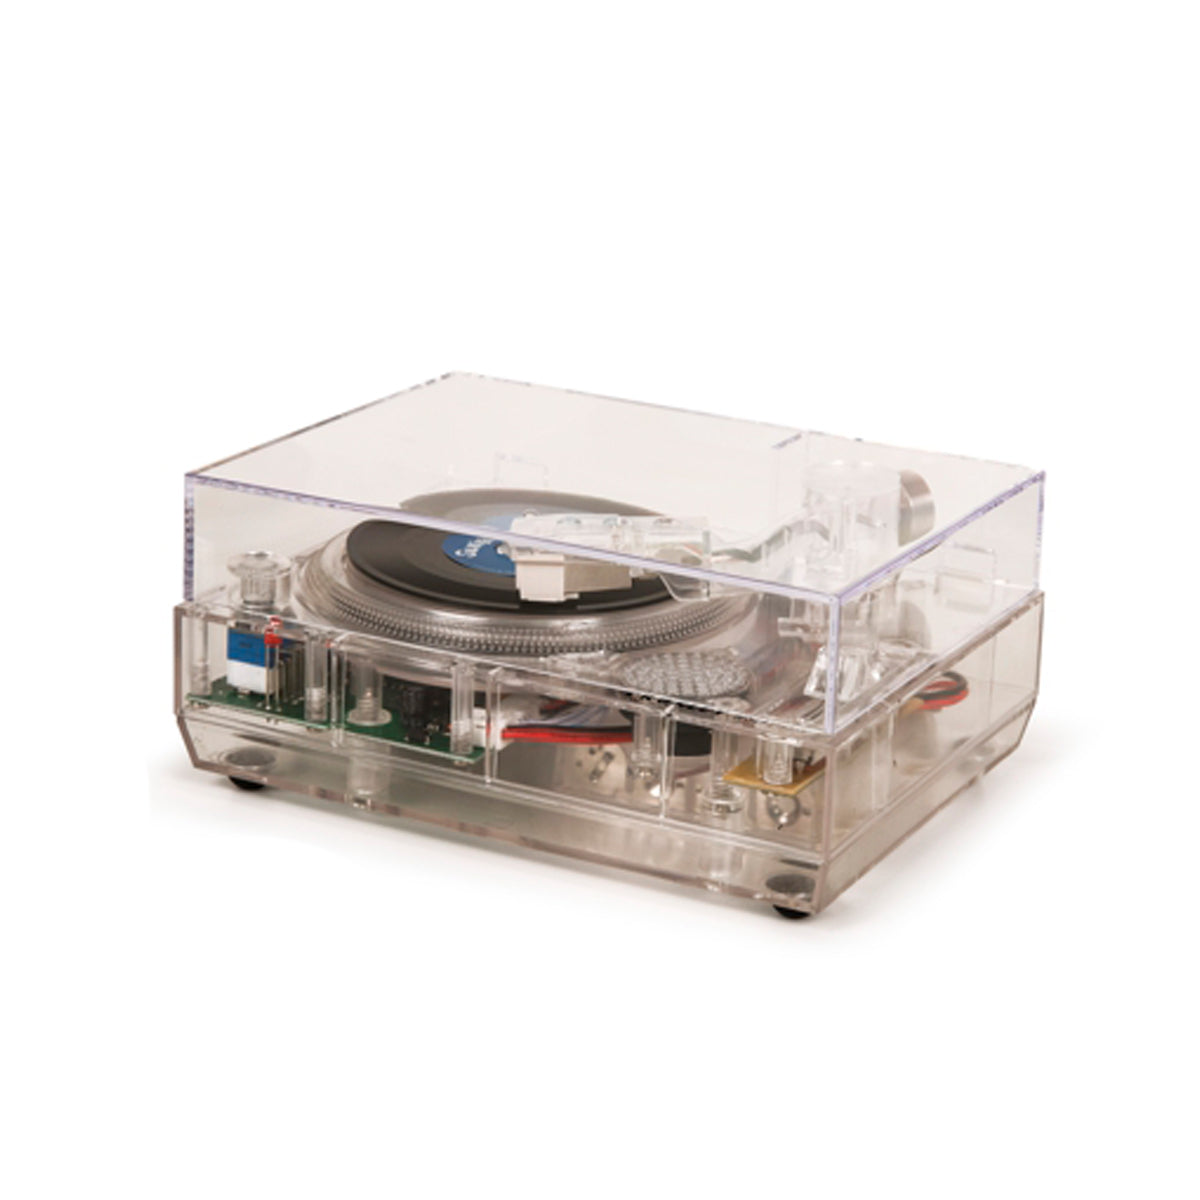 Transparent mini turntable released for Record Store Day - Vinyl